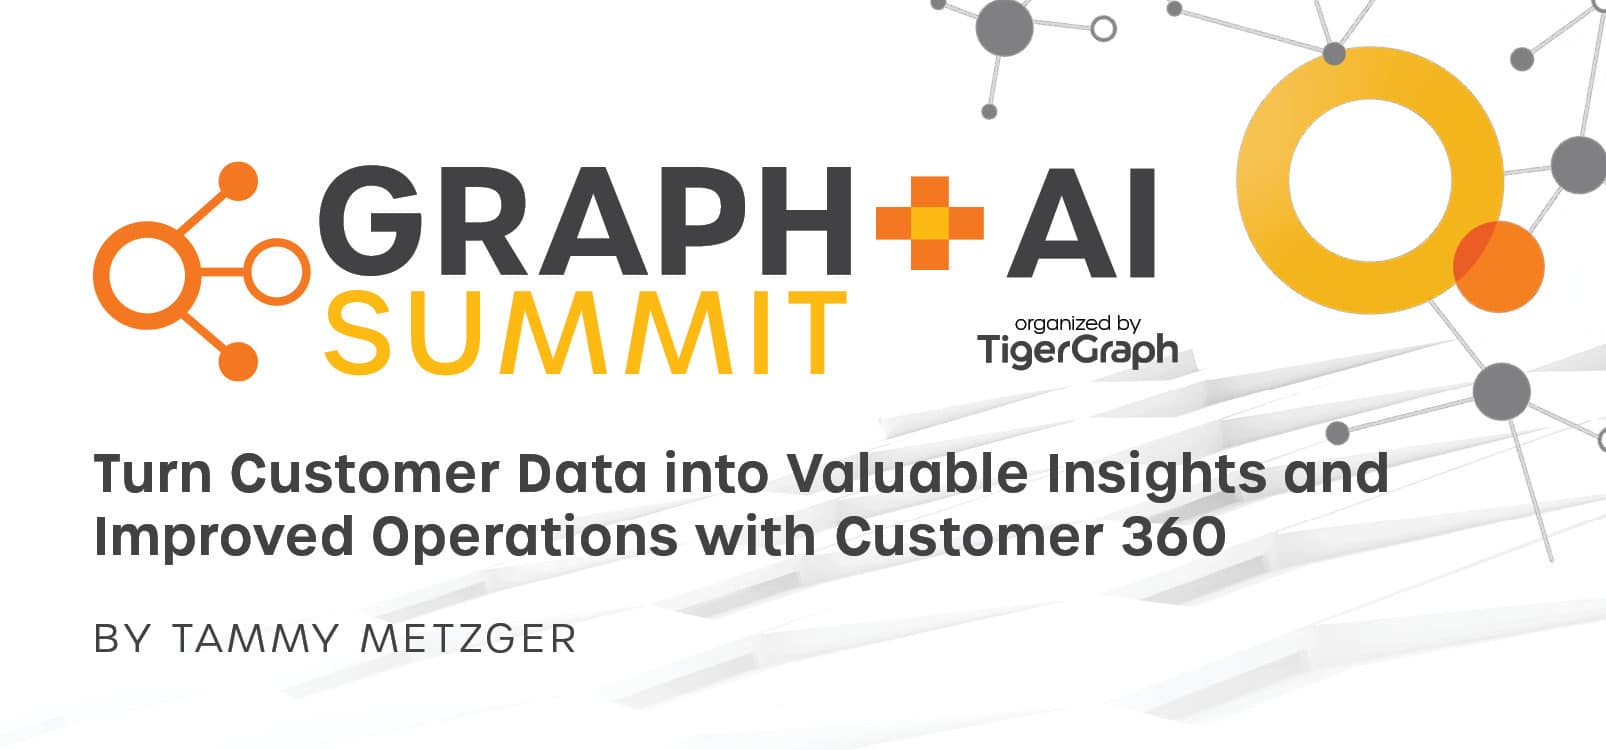 Turn Customer Data into Valuable Insights and Improved Operations with Customer 360